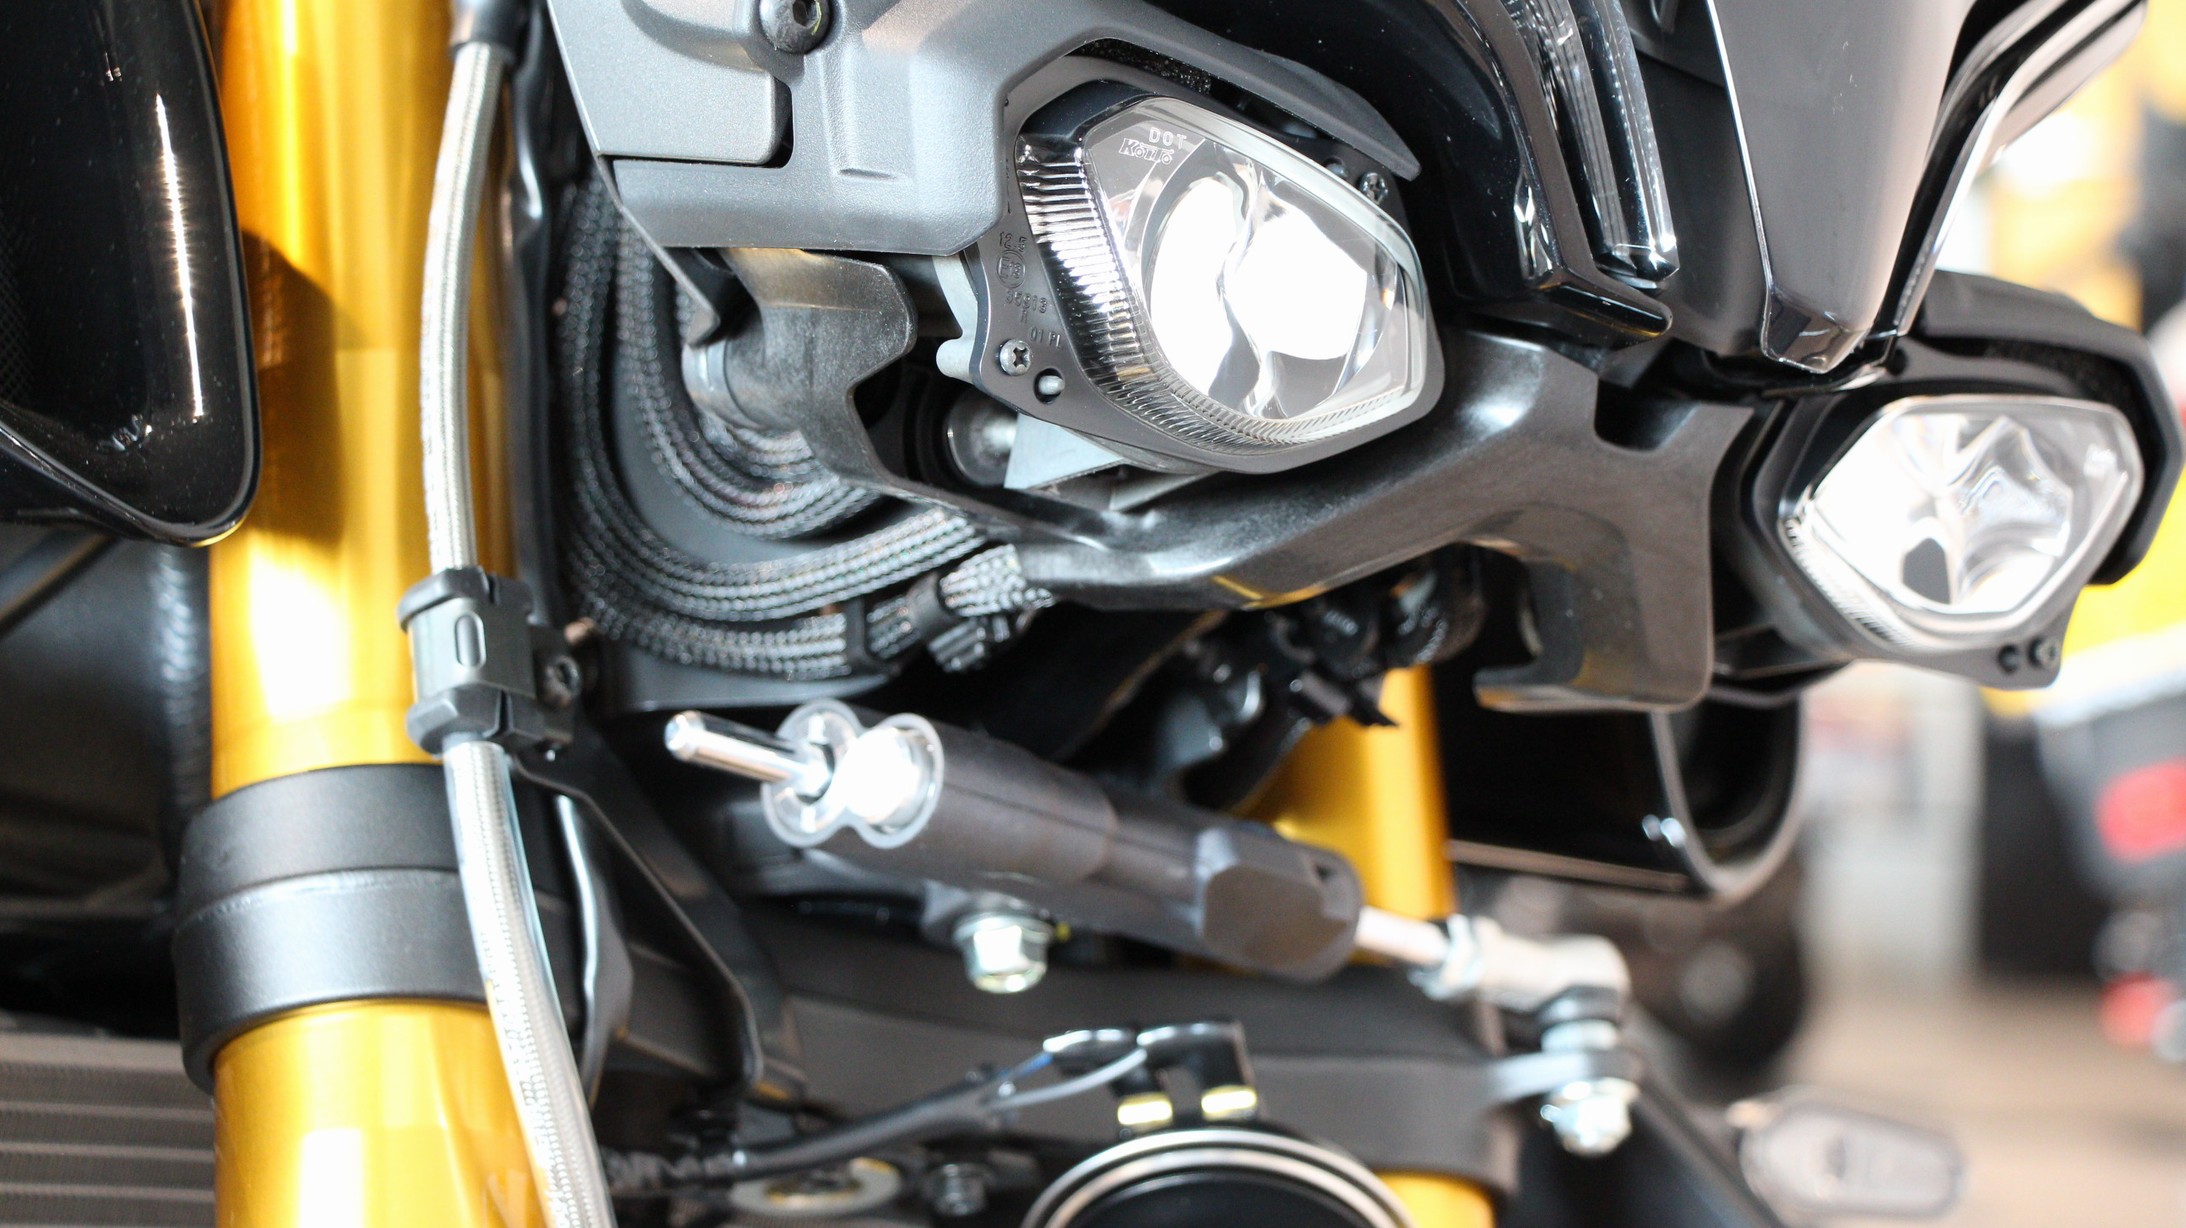 YAMAHA - MT-10 SP ABS Extra veel inruil